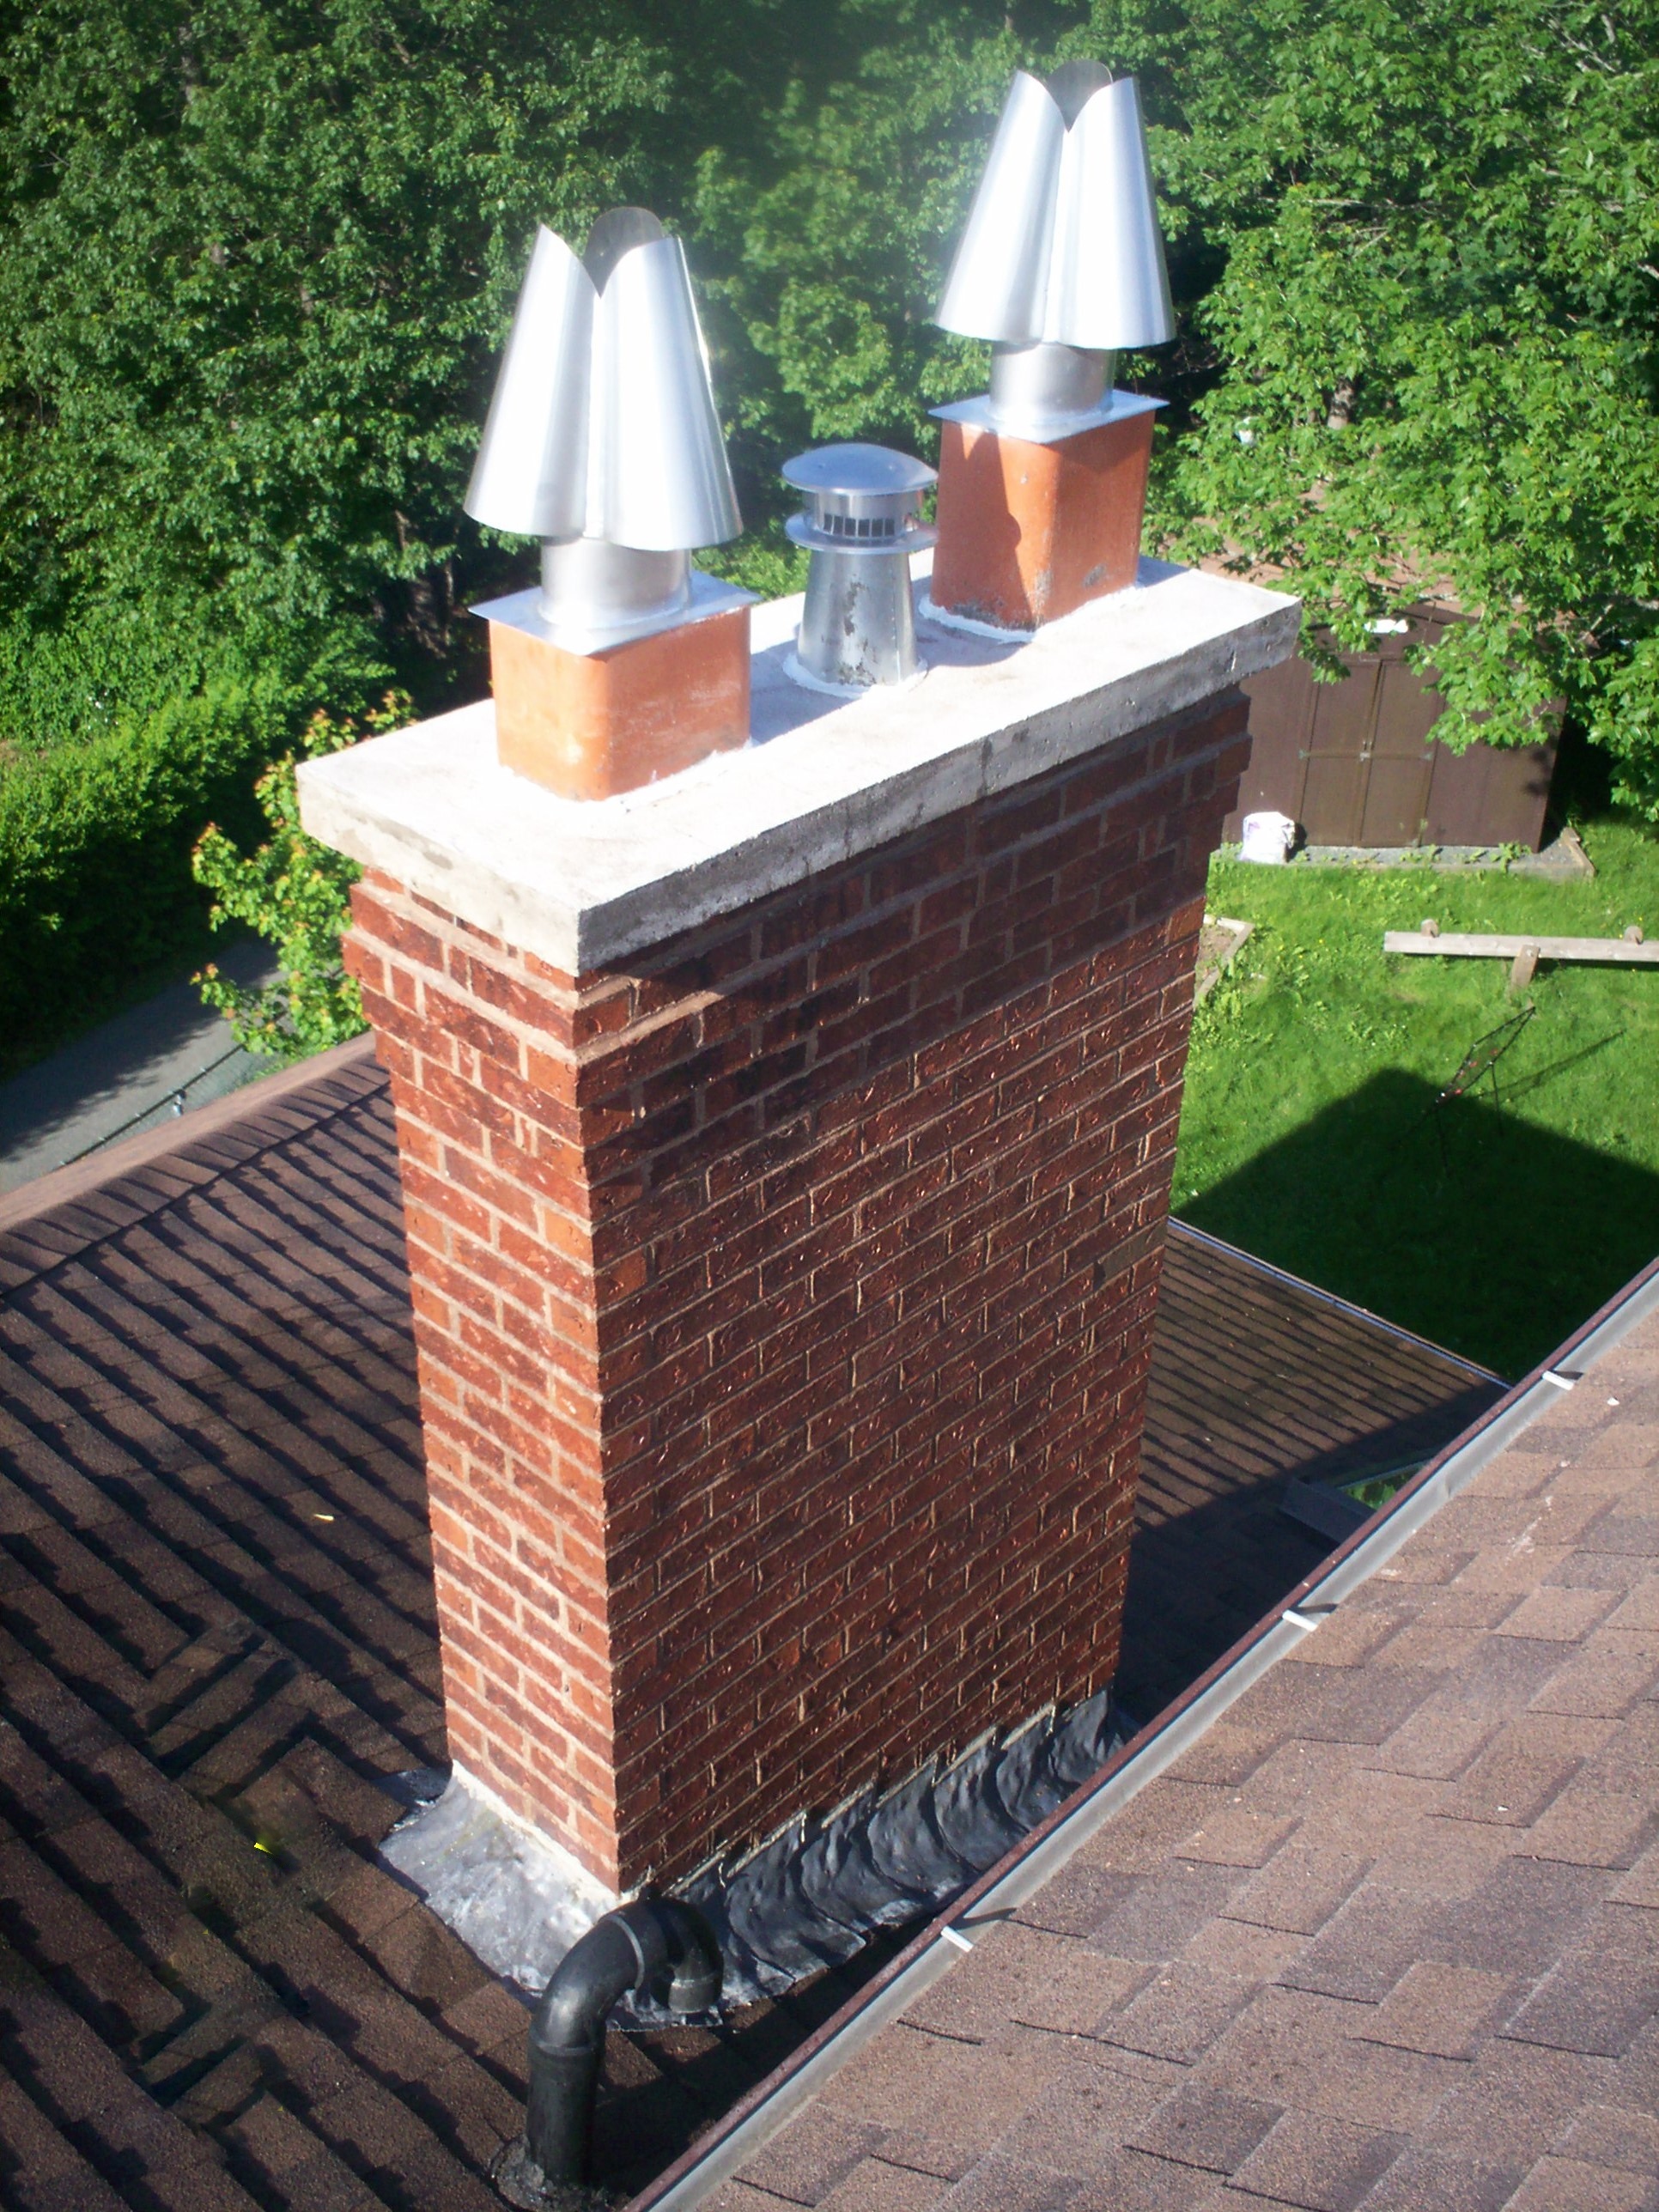 image of masonry repair-masonry repair services completed in Halifax-Dartmouth Regional Municipality, NS by Pro Chimney Services based in Halifax, NS servicing all of the Halifax-Dartmouth Regional Municipality,Bedford, Sackville, Mount Uniacke, Hantsport, Windsor, Wolfville, Kentville, Chester Basin, Mahone Bay, Lunenburg, Bridgewater, Liverpool, Fall River, Wellington, Enfield, Elmsdale, Brookfield, Truro, Musquodoboit Harbour & surrounding areas.